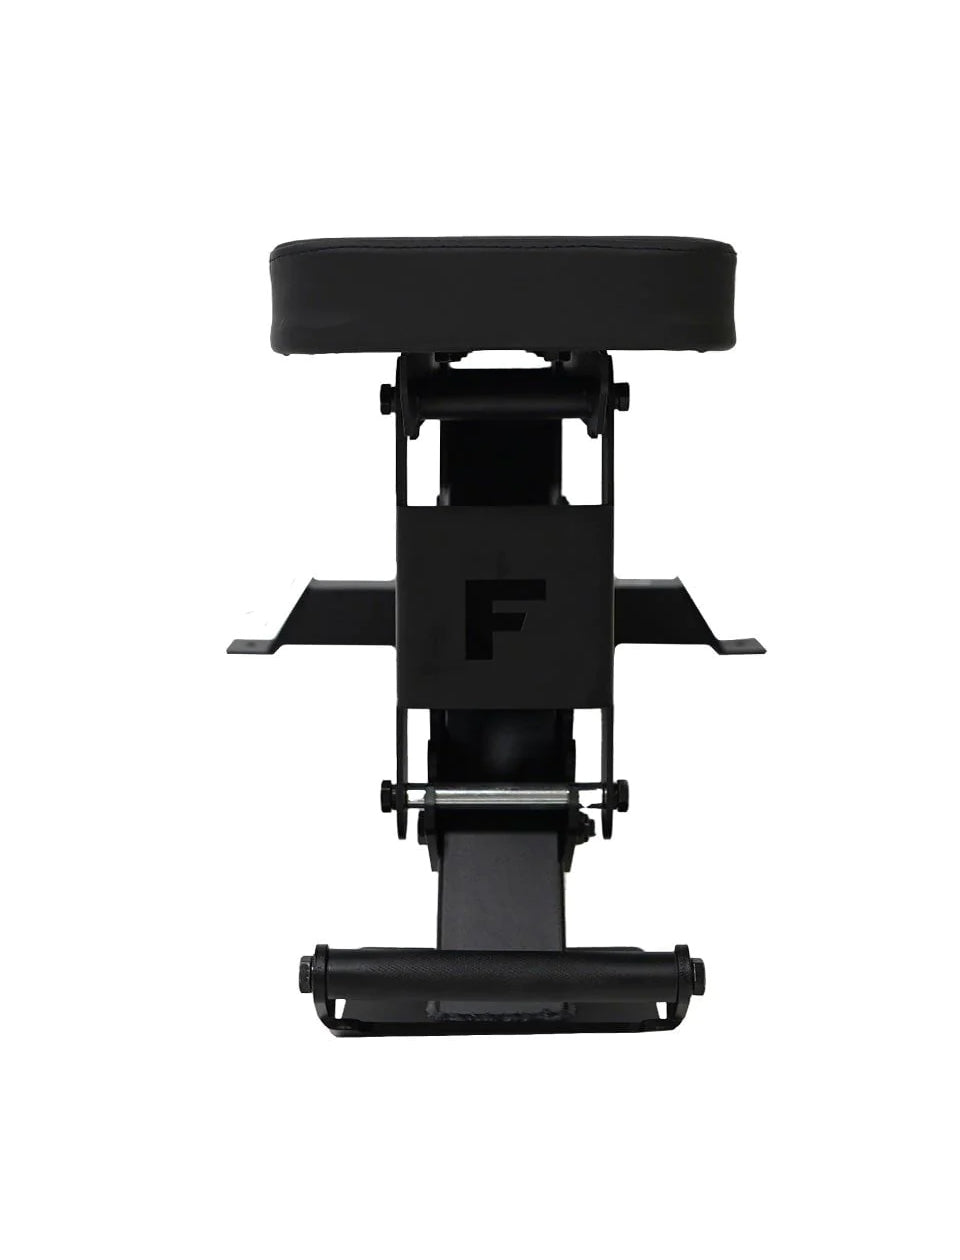 FORCE USA Pro Series FID Bench